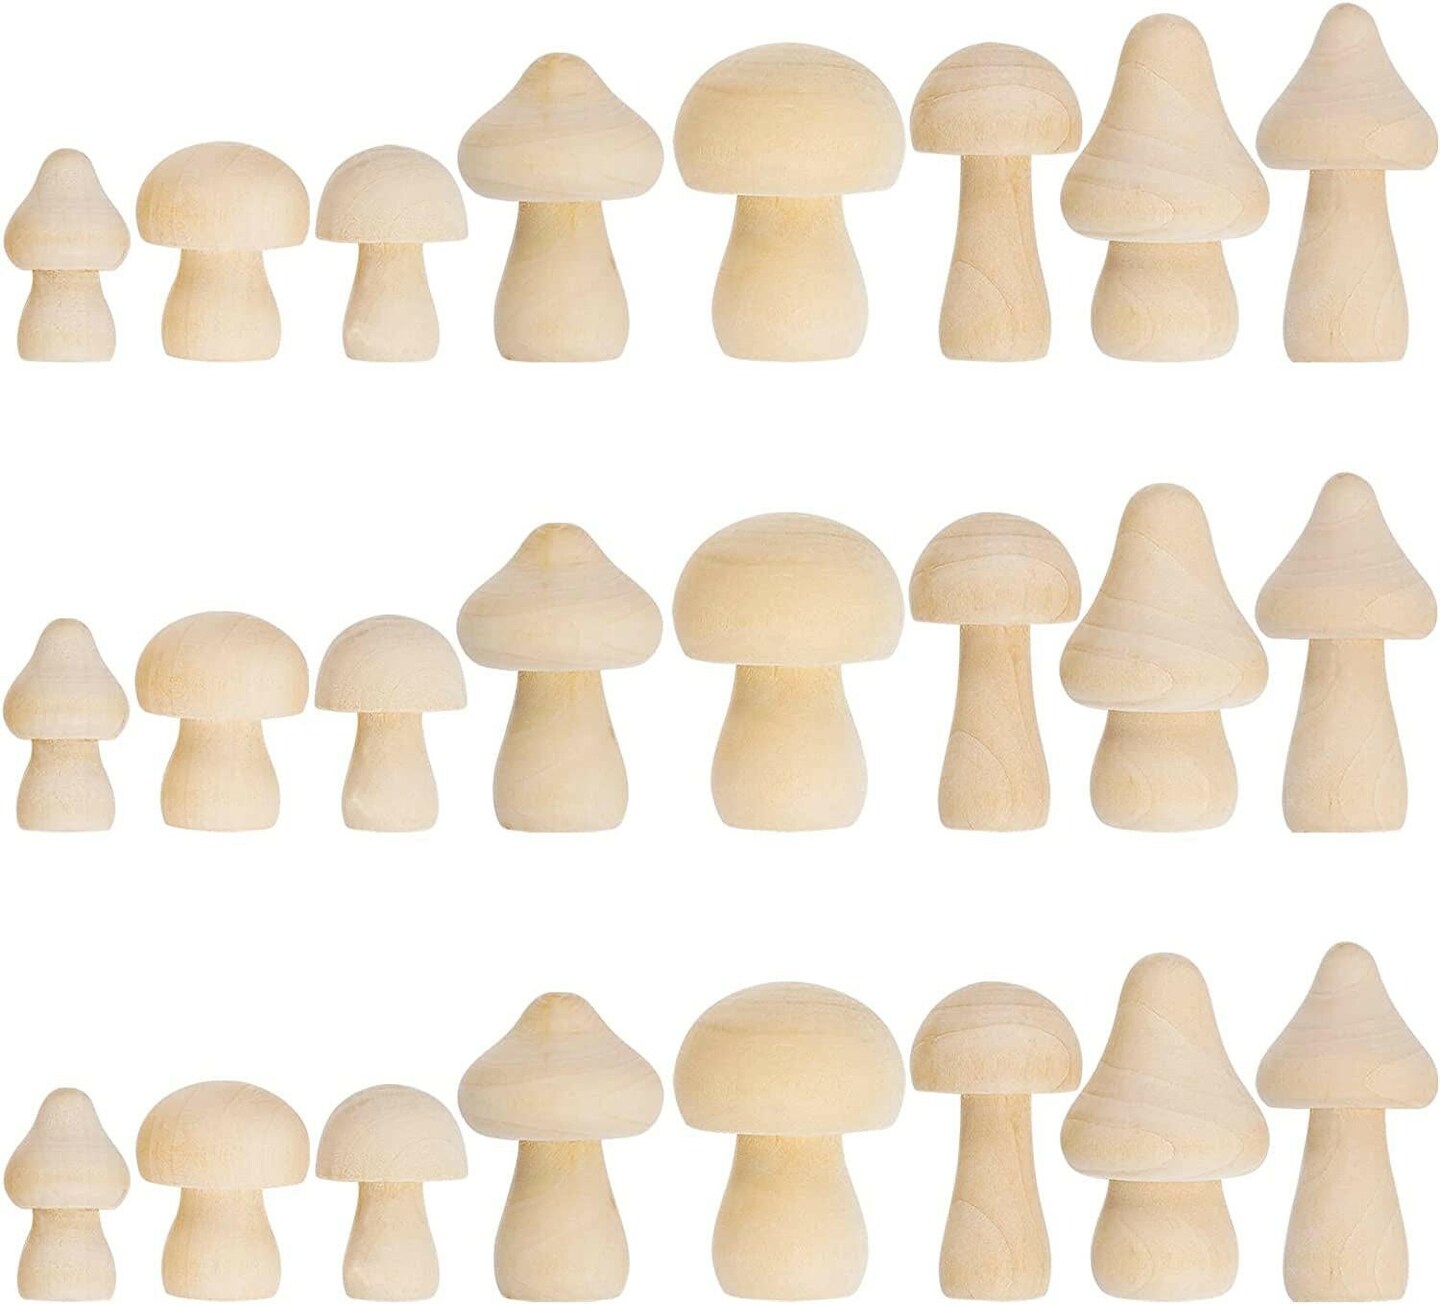 24 Pieces Unfinished Wooden Mushroom Mini Wood Mushrooms Natural Wooden  Mushrooms Unpainted Wood Mushrooms for Arts and Crafts Projects